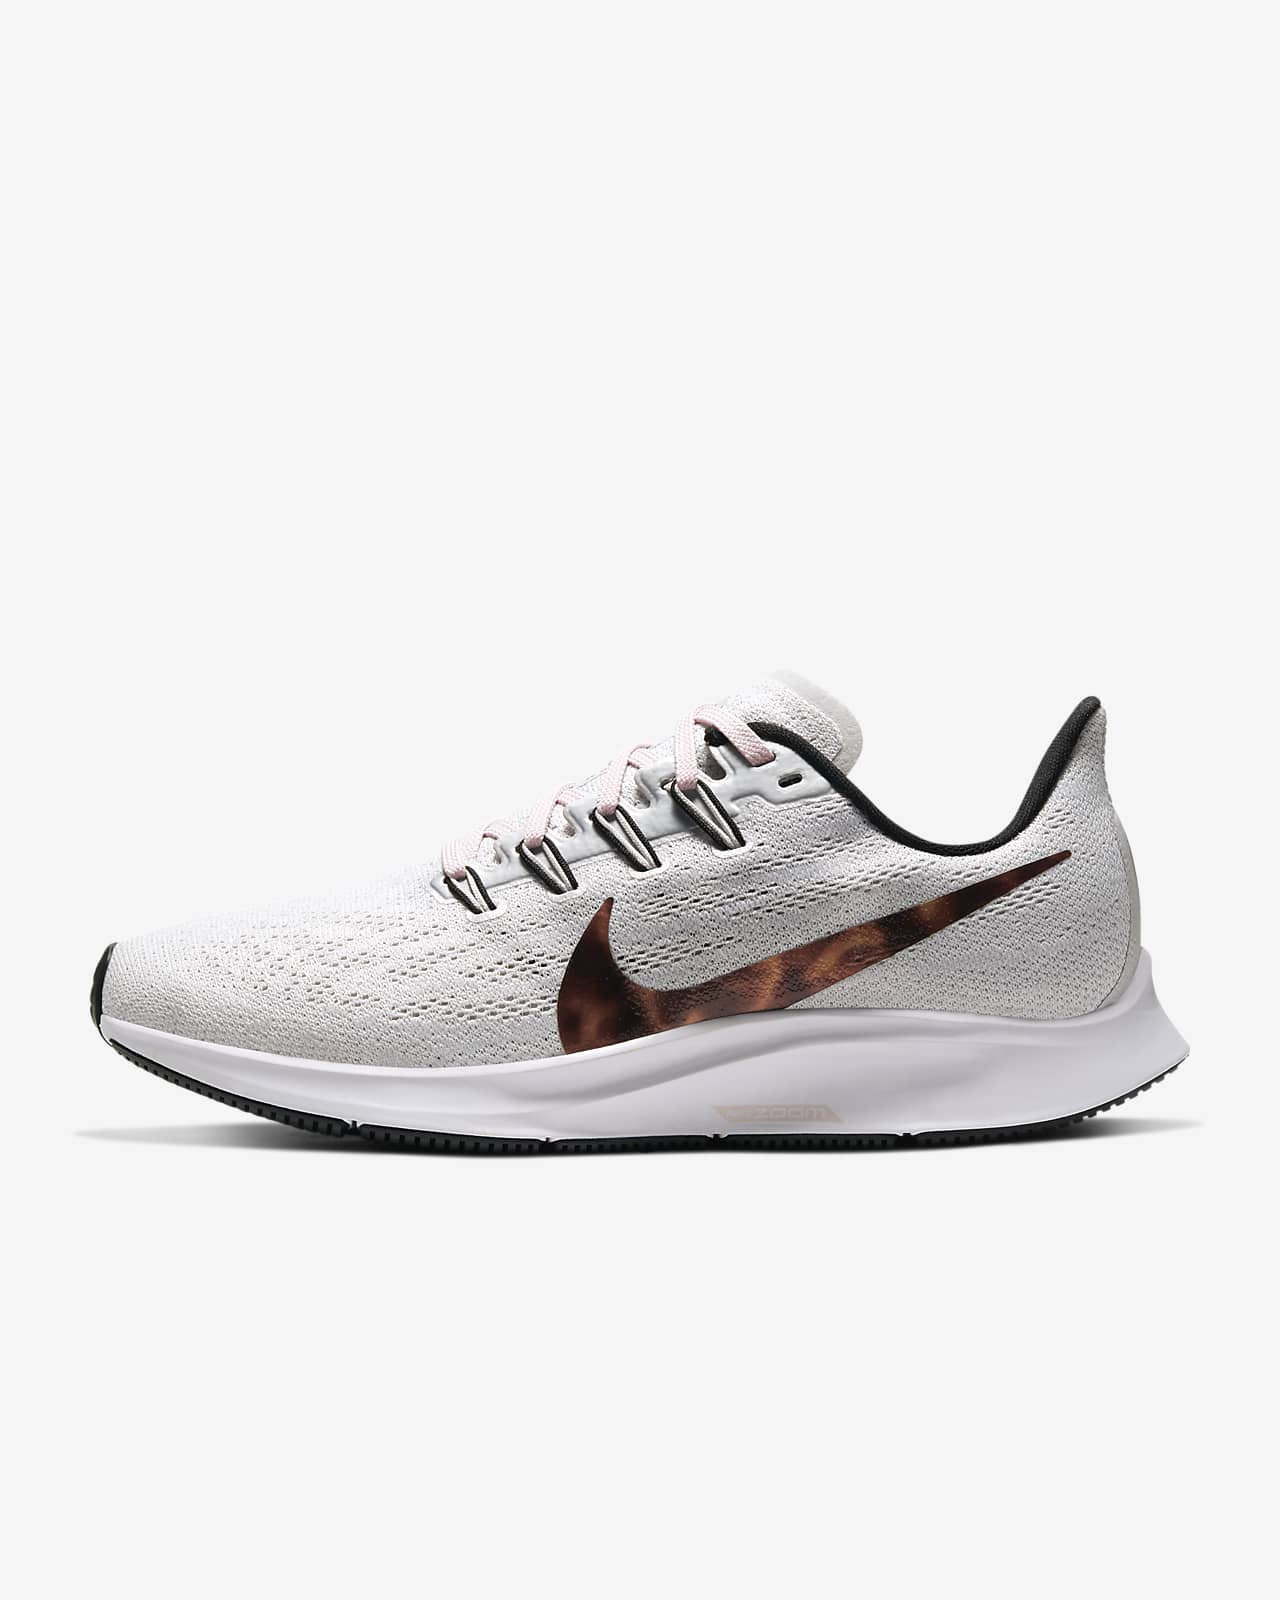 nike running shoes white and black